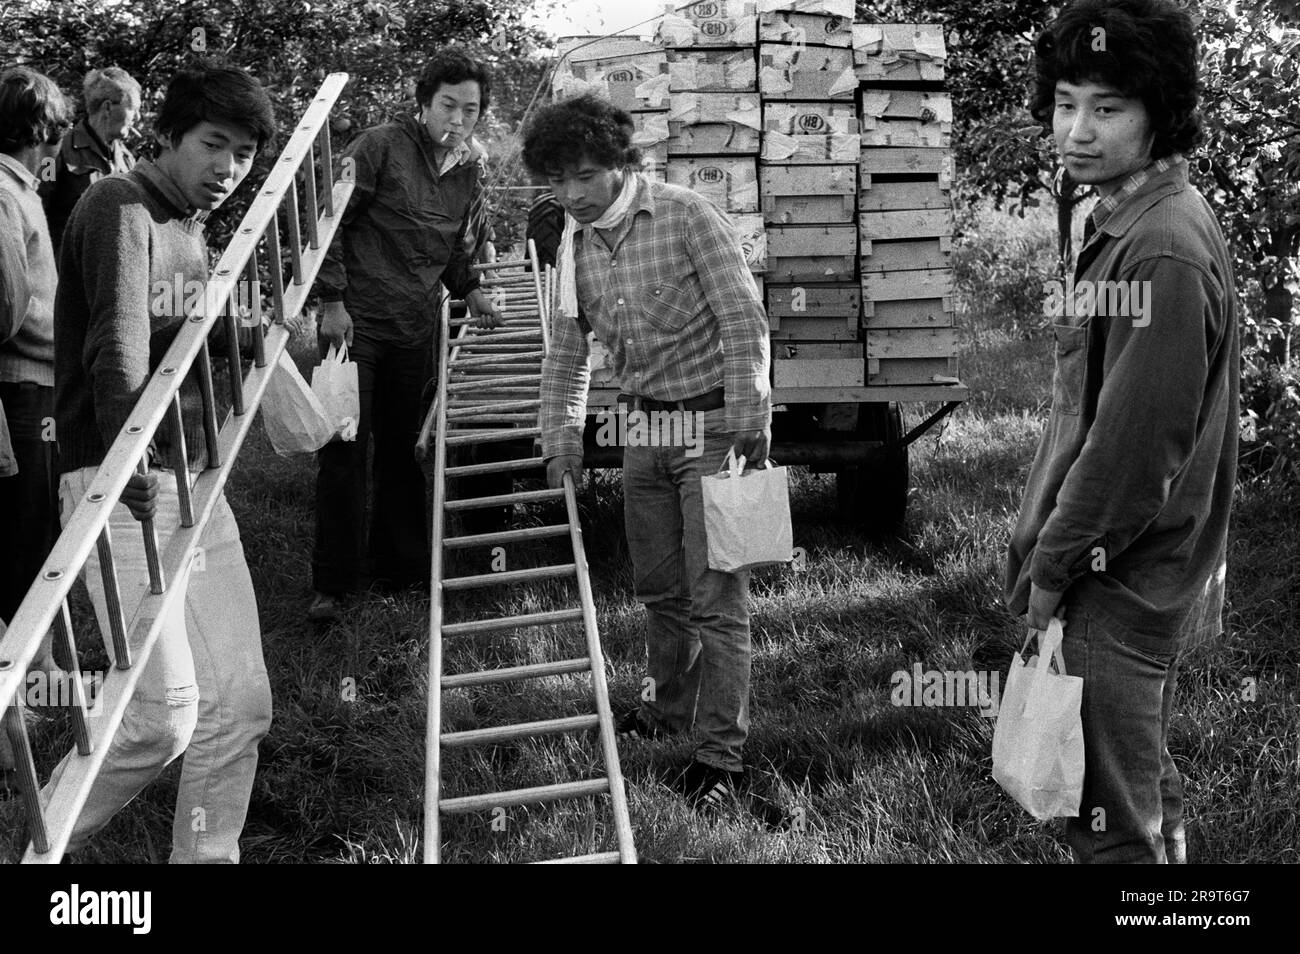 Foreign overseas students seasonal fruit picking. They each carry a packed bag that contains they lunch provided by the farm. The fruit farm is, Ayers and Son, Common Lane, Elm, Wisbech. Wisbech, Cambridgeshire, England circa 1977. 1970s UK HOMER SYKES Stock Photo